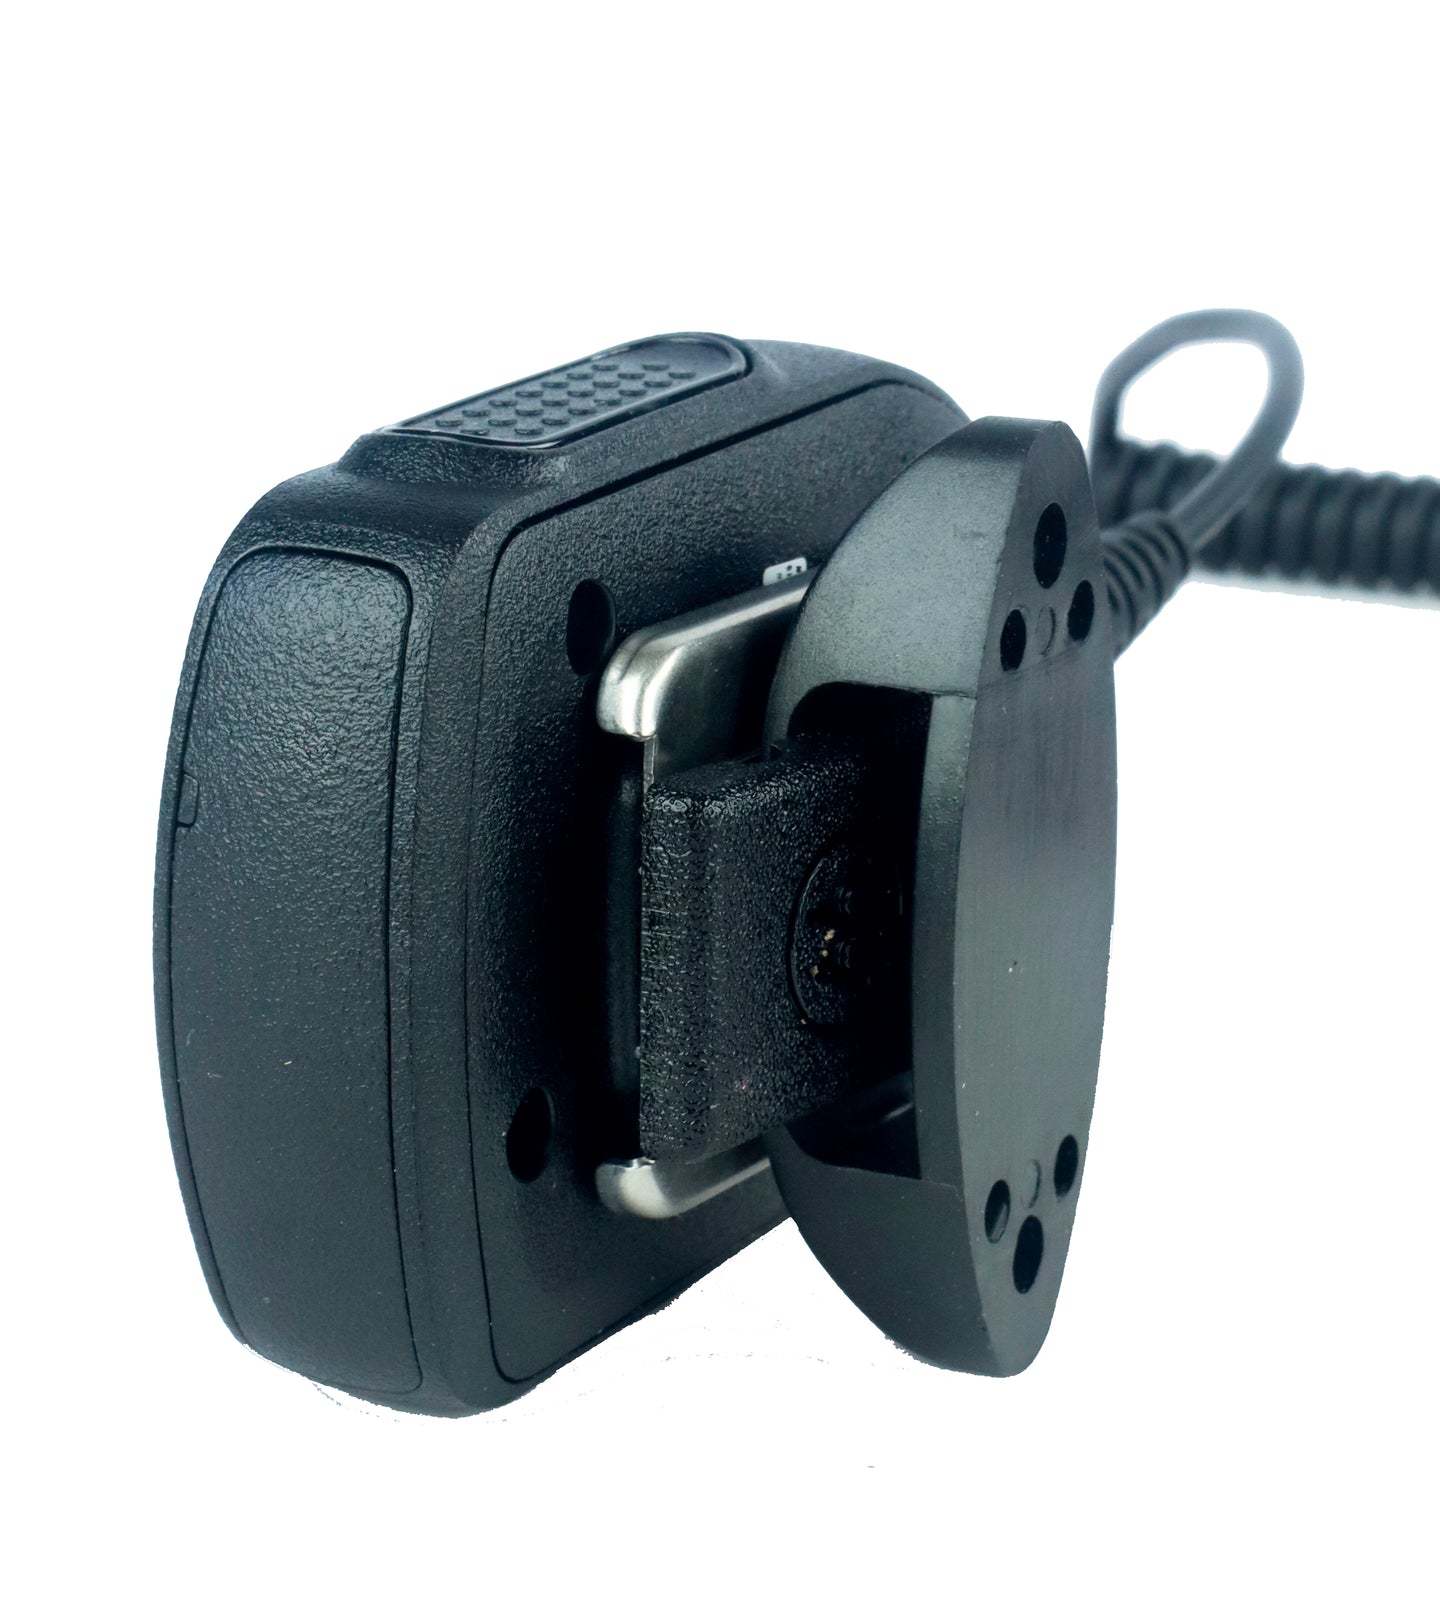 Speaker Microphone Mount For Motorola PMMN4125 And Any Speaker Mic With A Clip